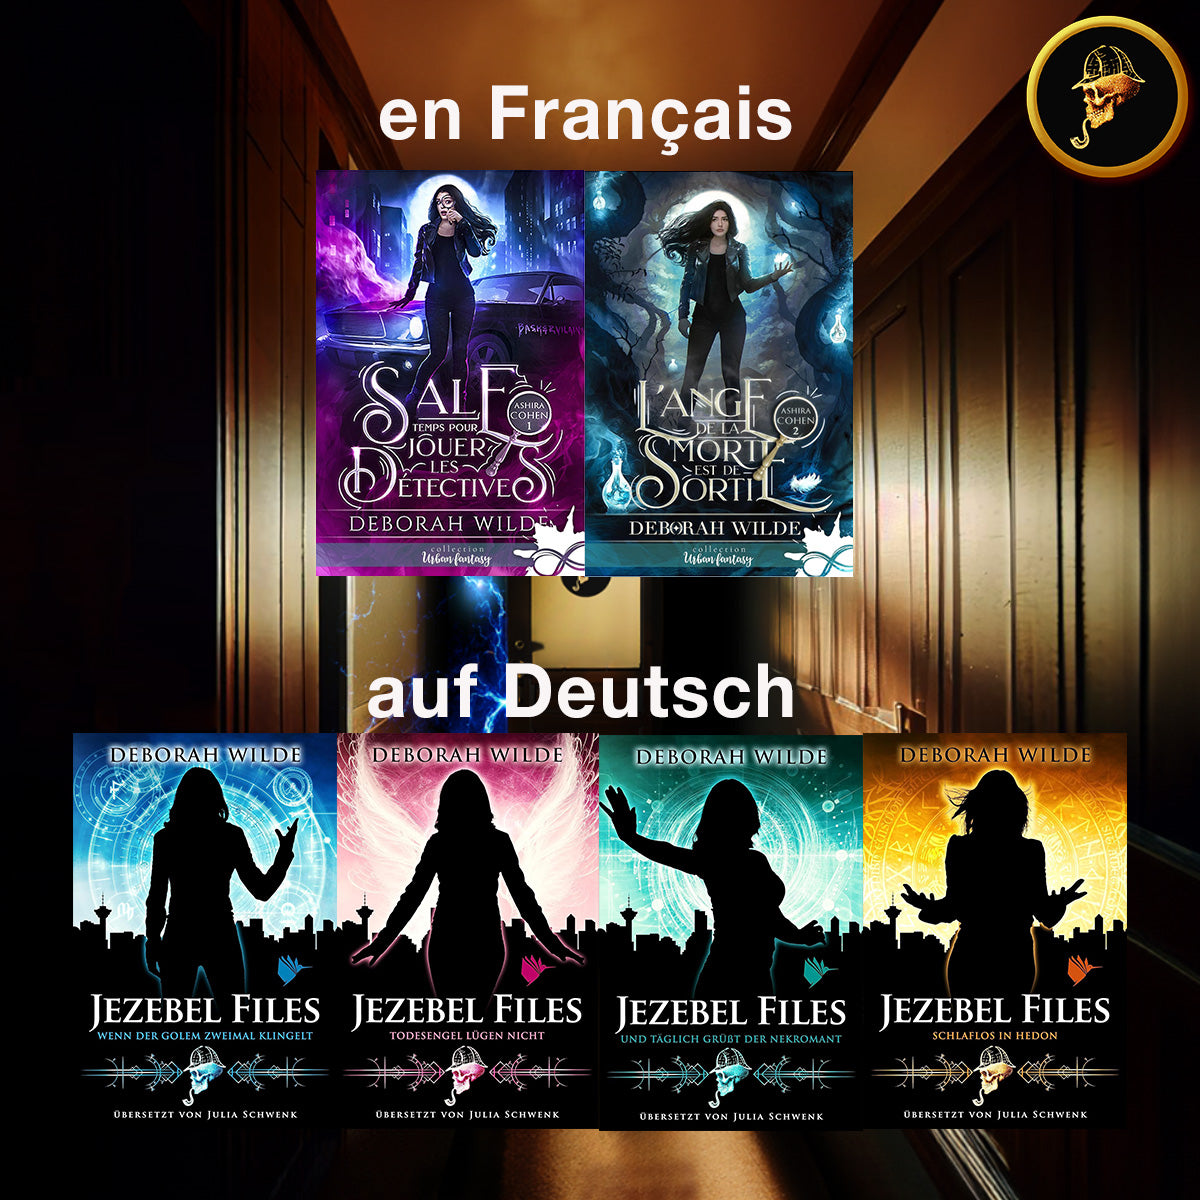 German and French covers for the translations of Jezebel Files urban fantasy series by Deborah Wilde.